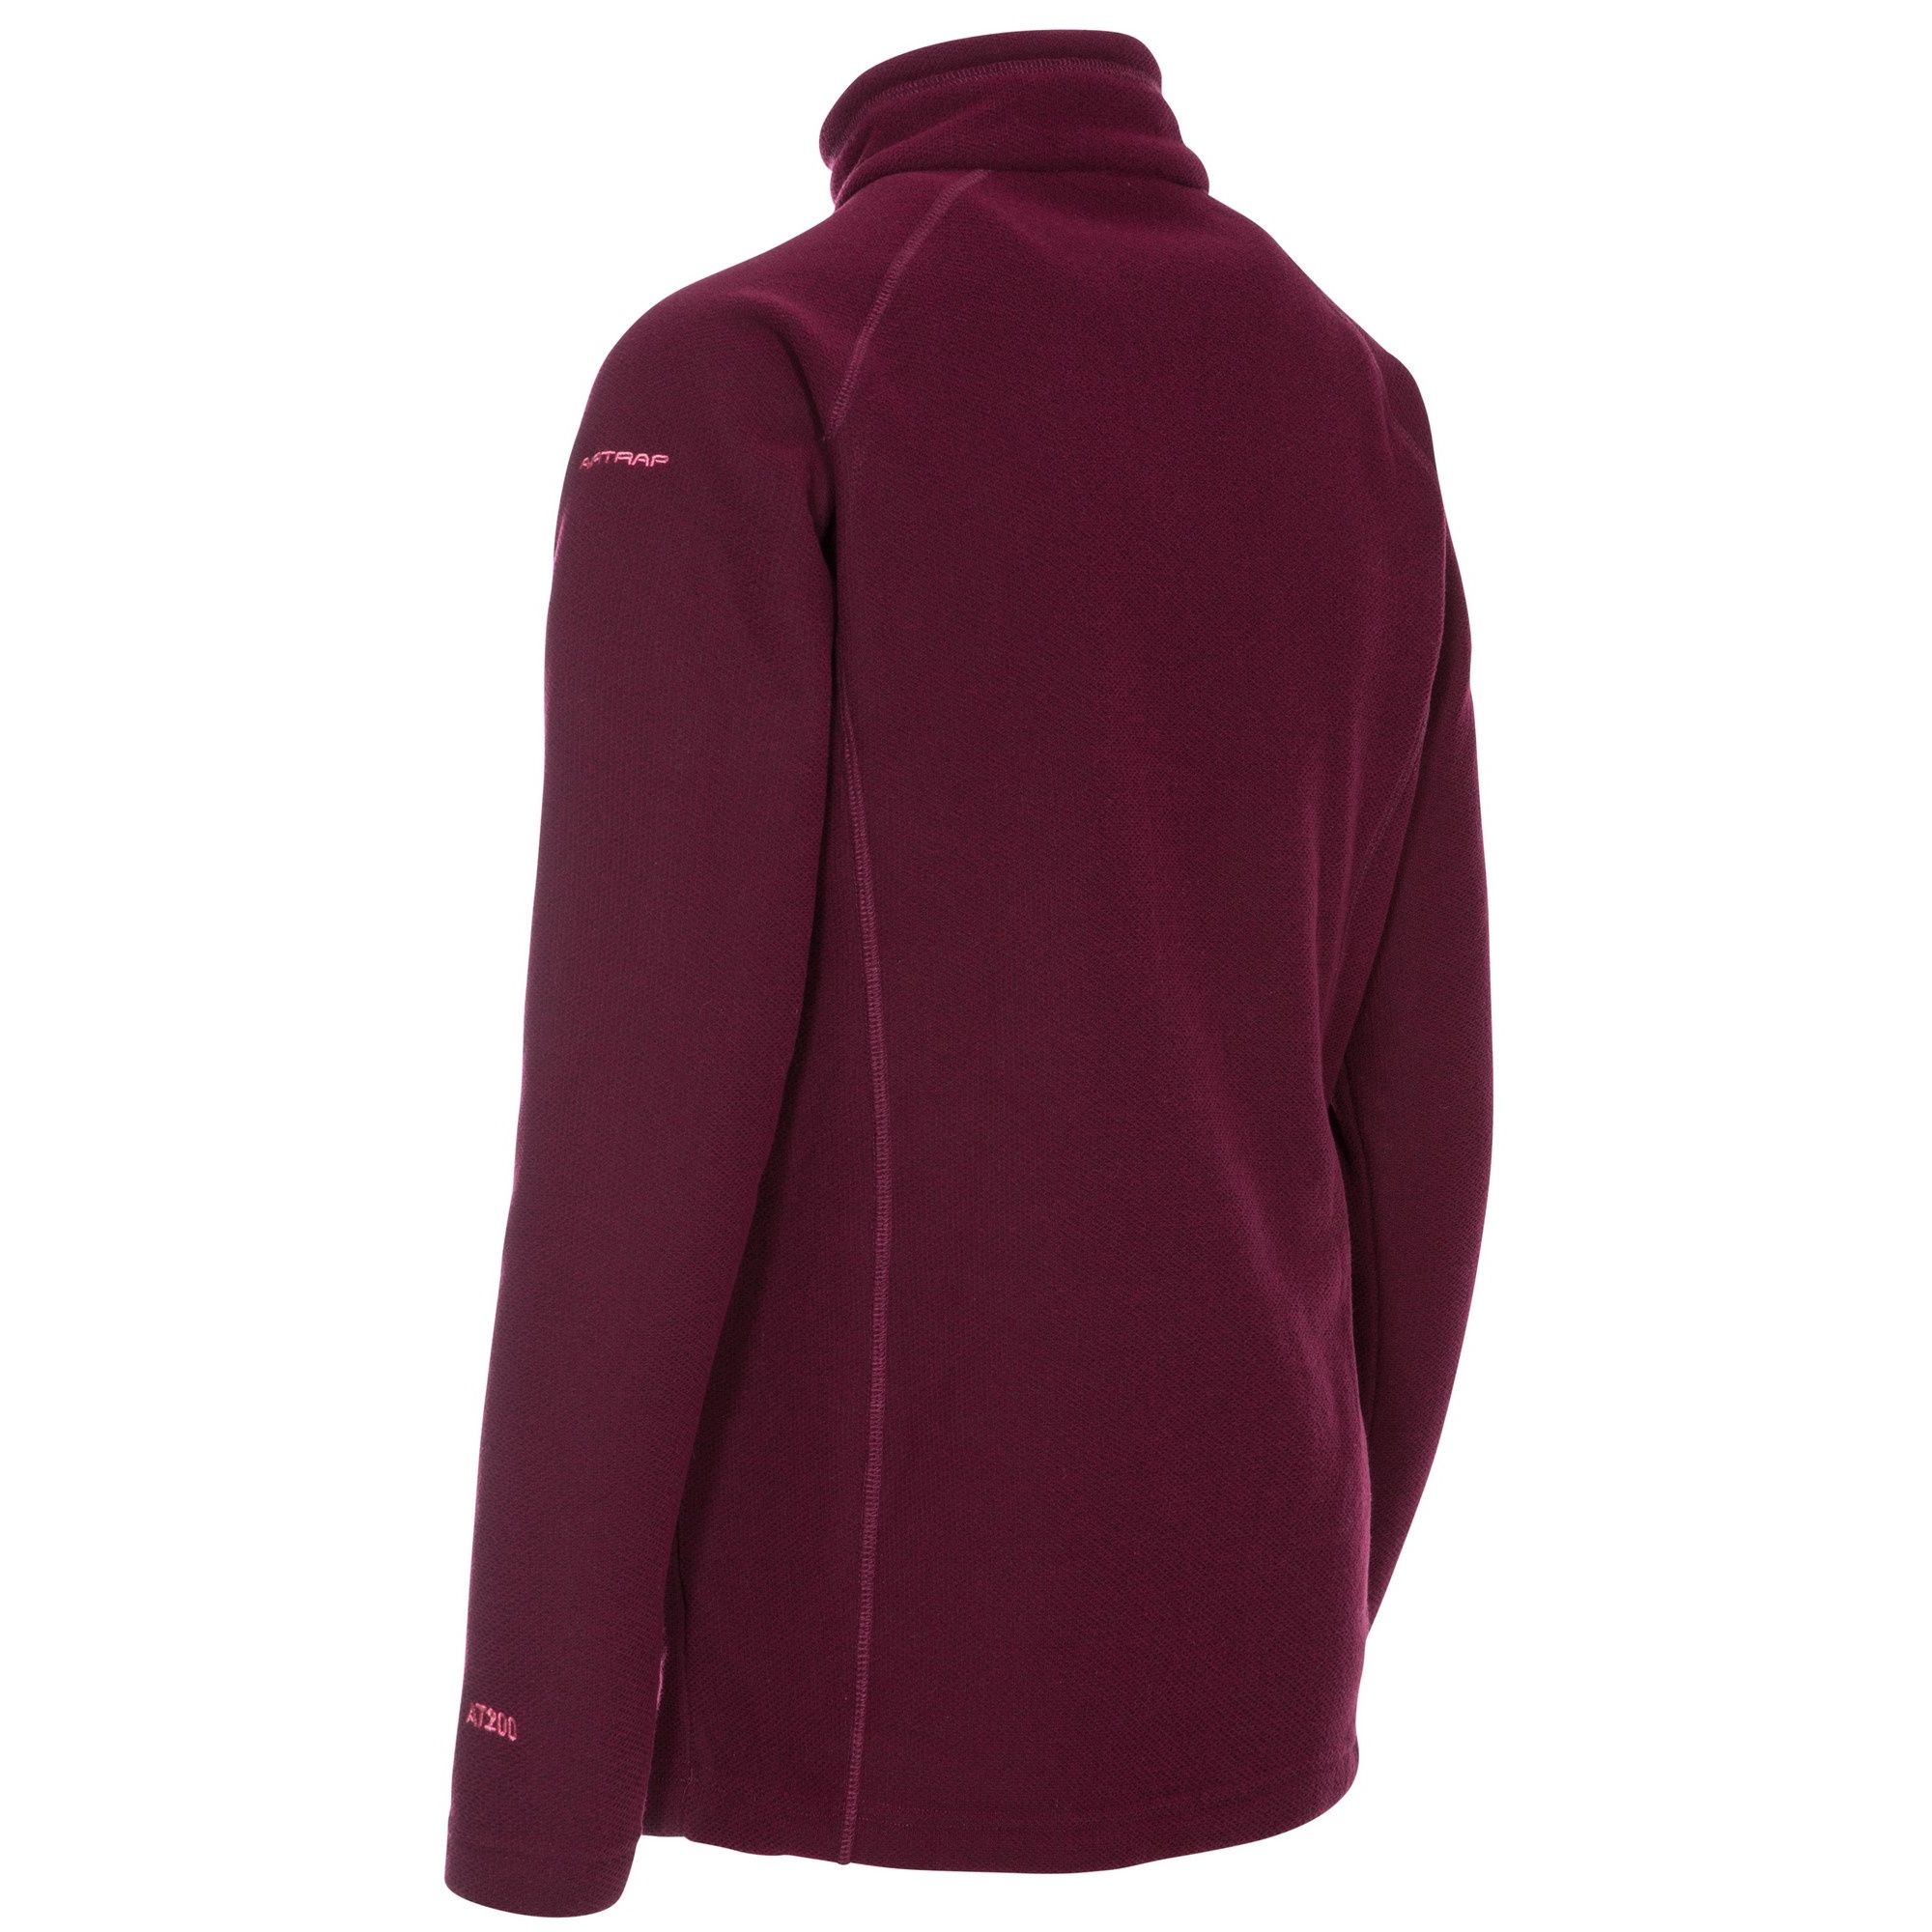 Textured fleece with a brushed back. 1/2 zip neck with chin guard. 2 zip pockets. Airtrap. 220gsm. 100% Polyester. Trespass Womens Chest Sizing (approx): XS/8 - 32in/81cm, S/10 - 34in/86cm, M/12 - 36in/91.4cm, L/14 - 38in/96.5cm, XL/16 - 40in/101.5cm, XXL/18 - 42in/106.5cm.